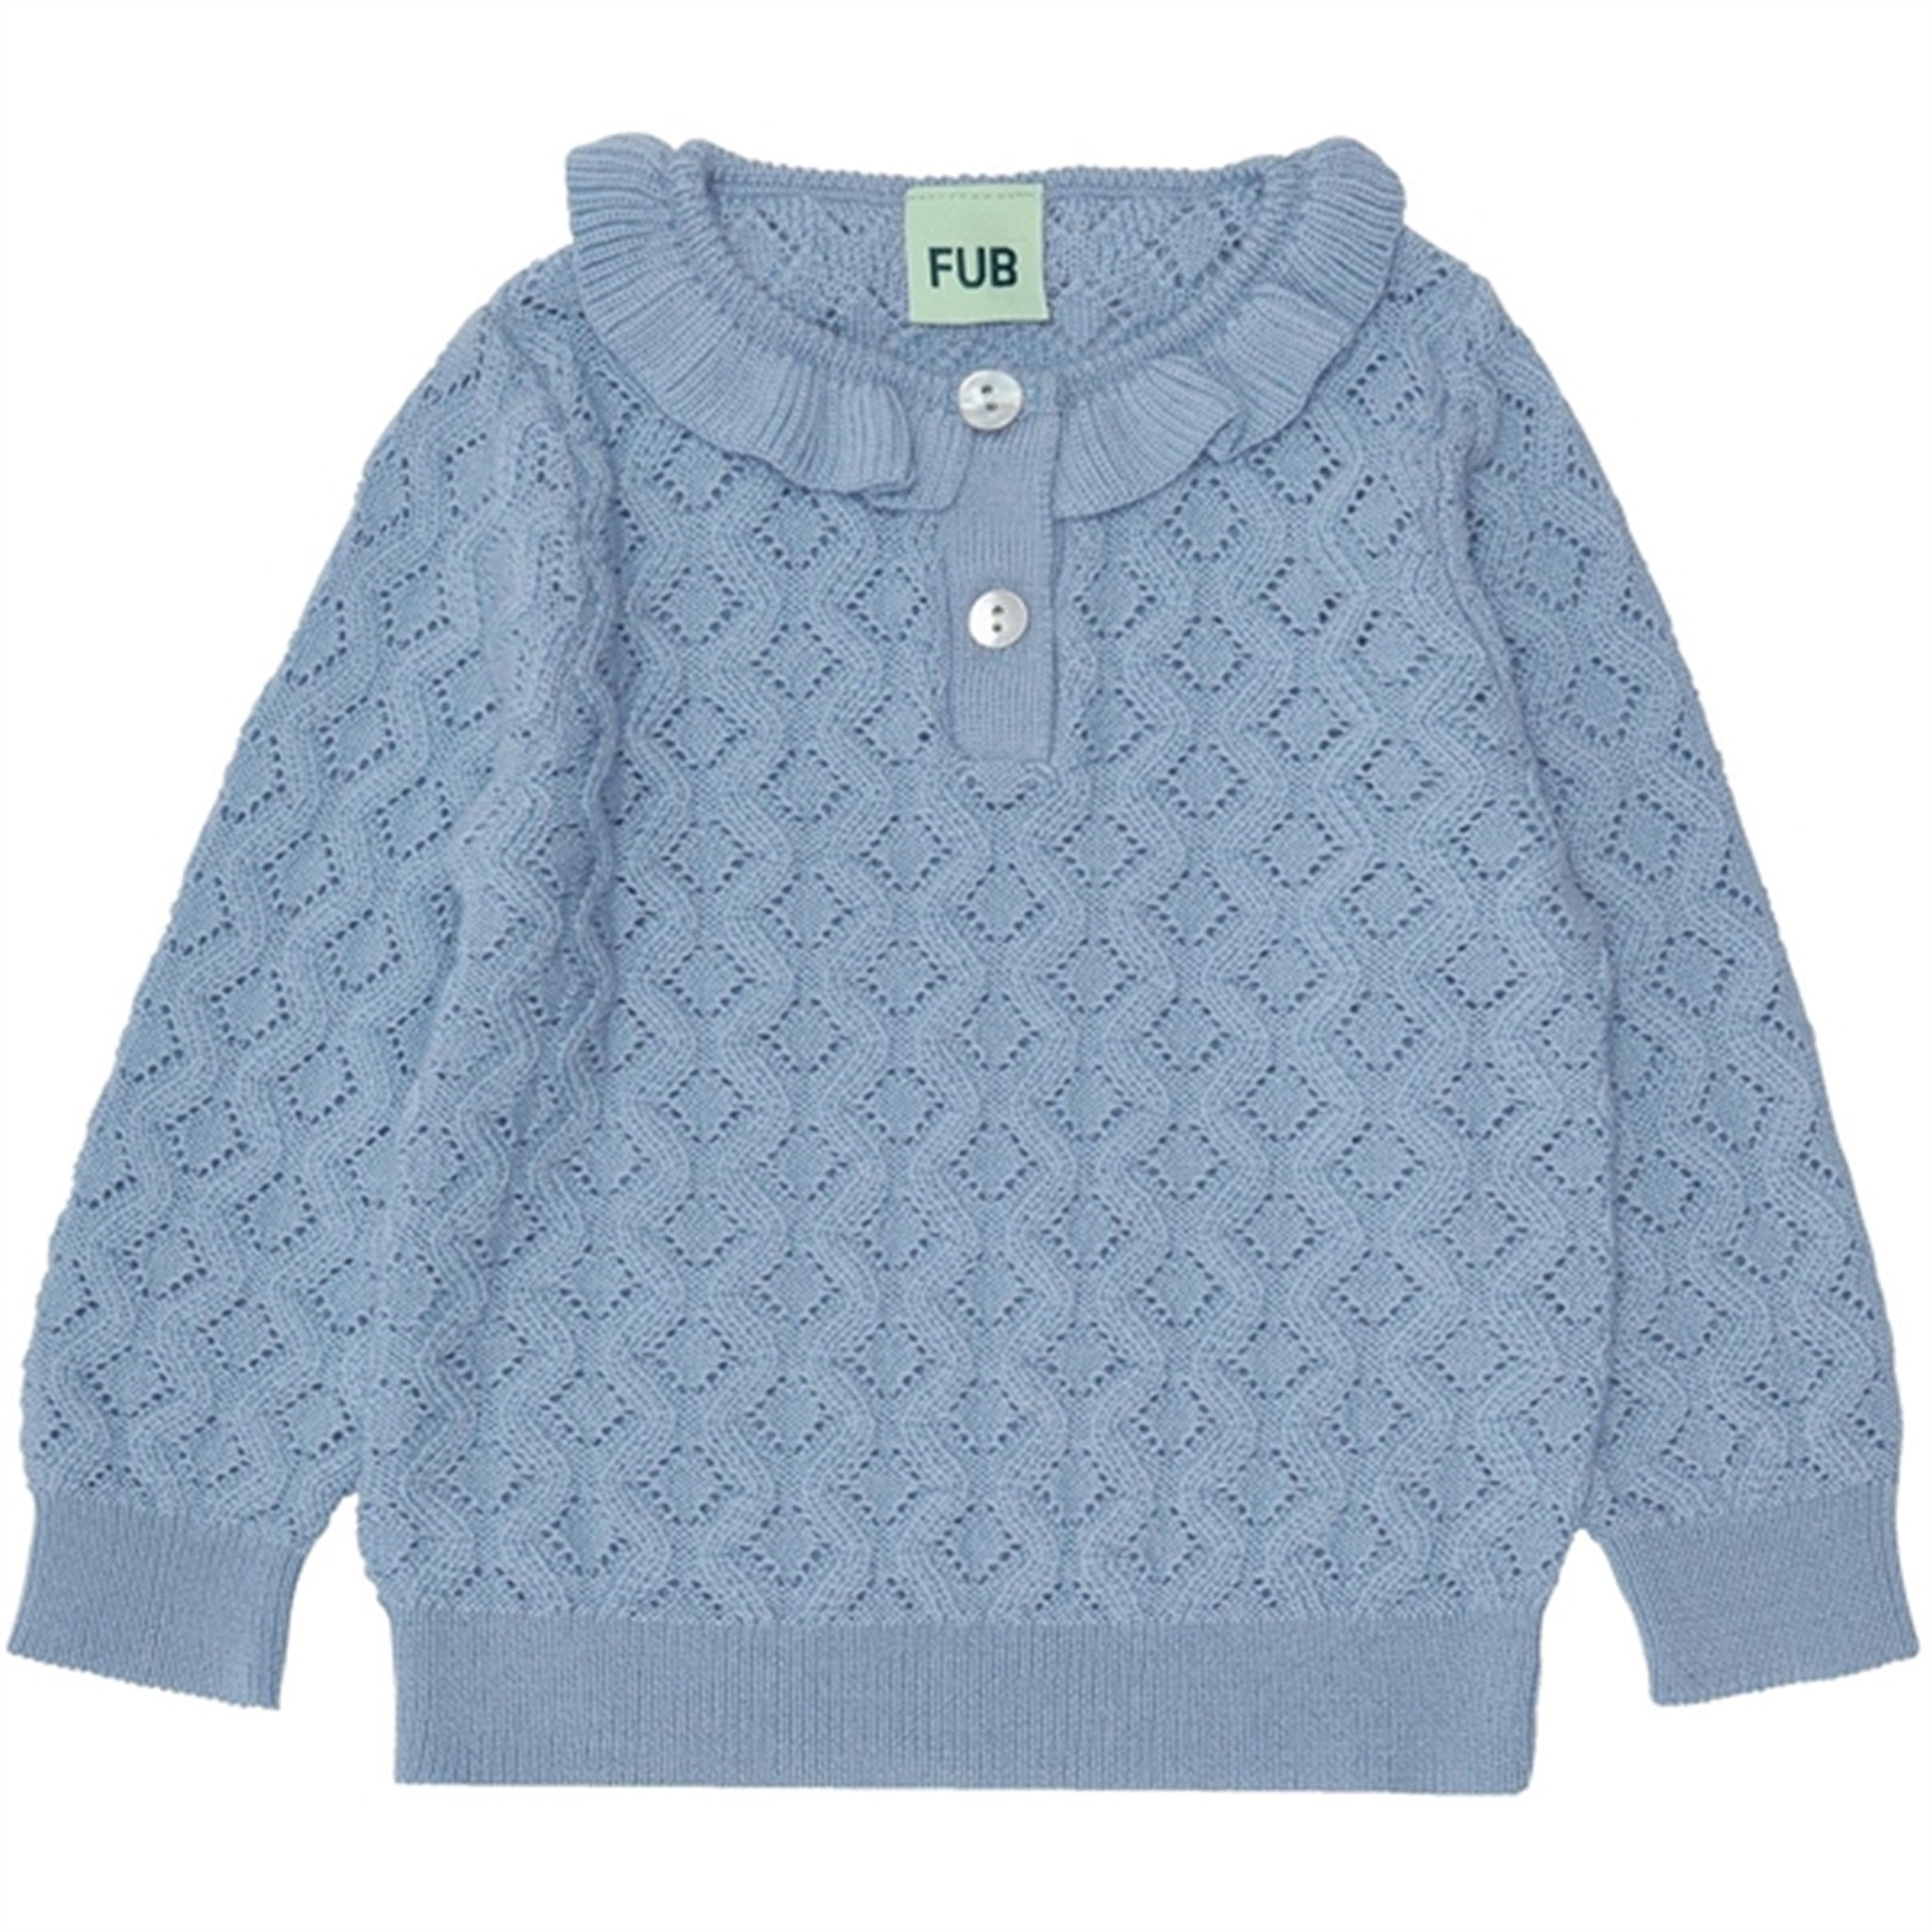 FUB Baby Pointelle Bluse Sky